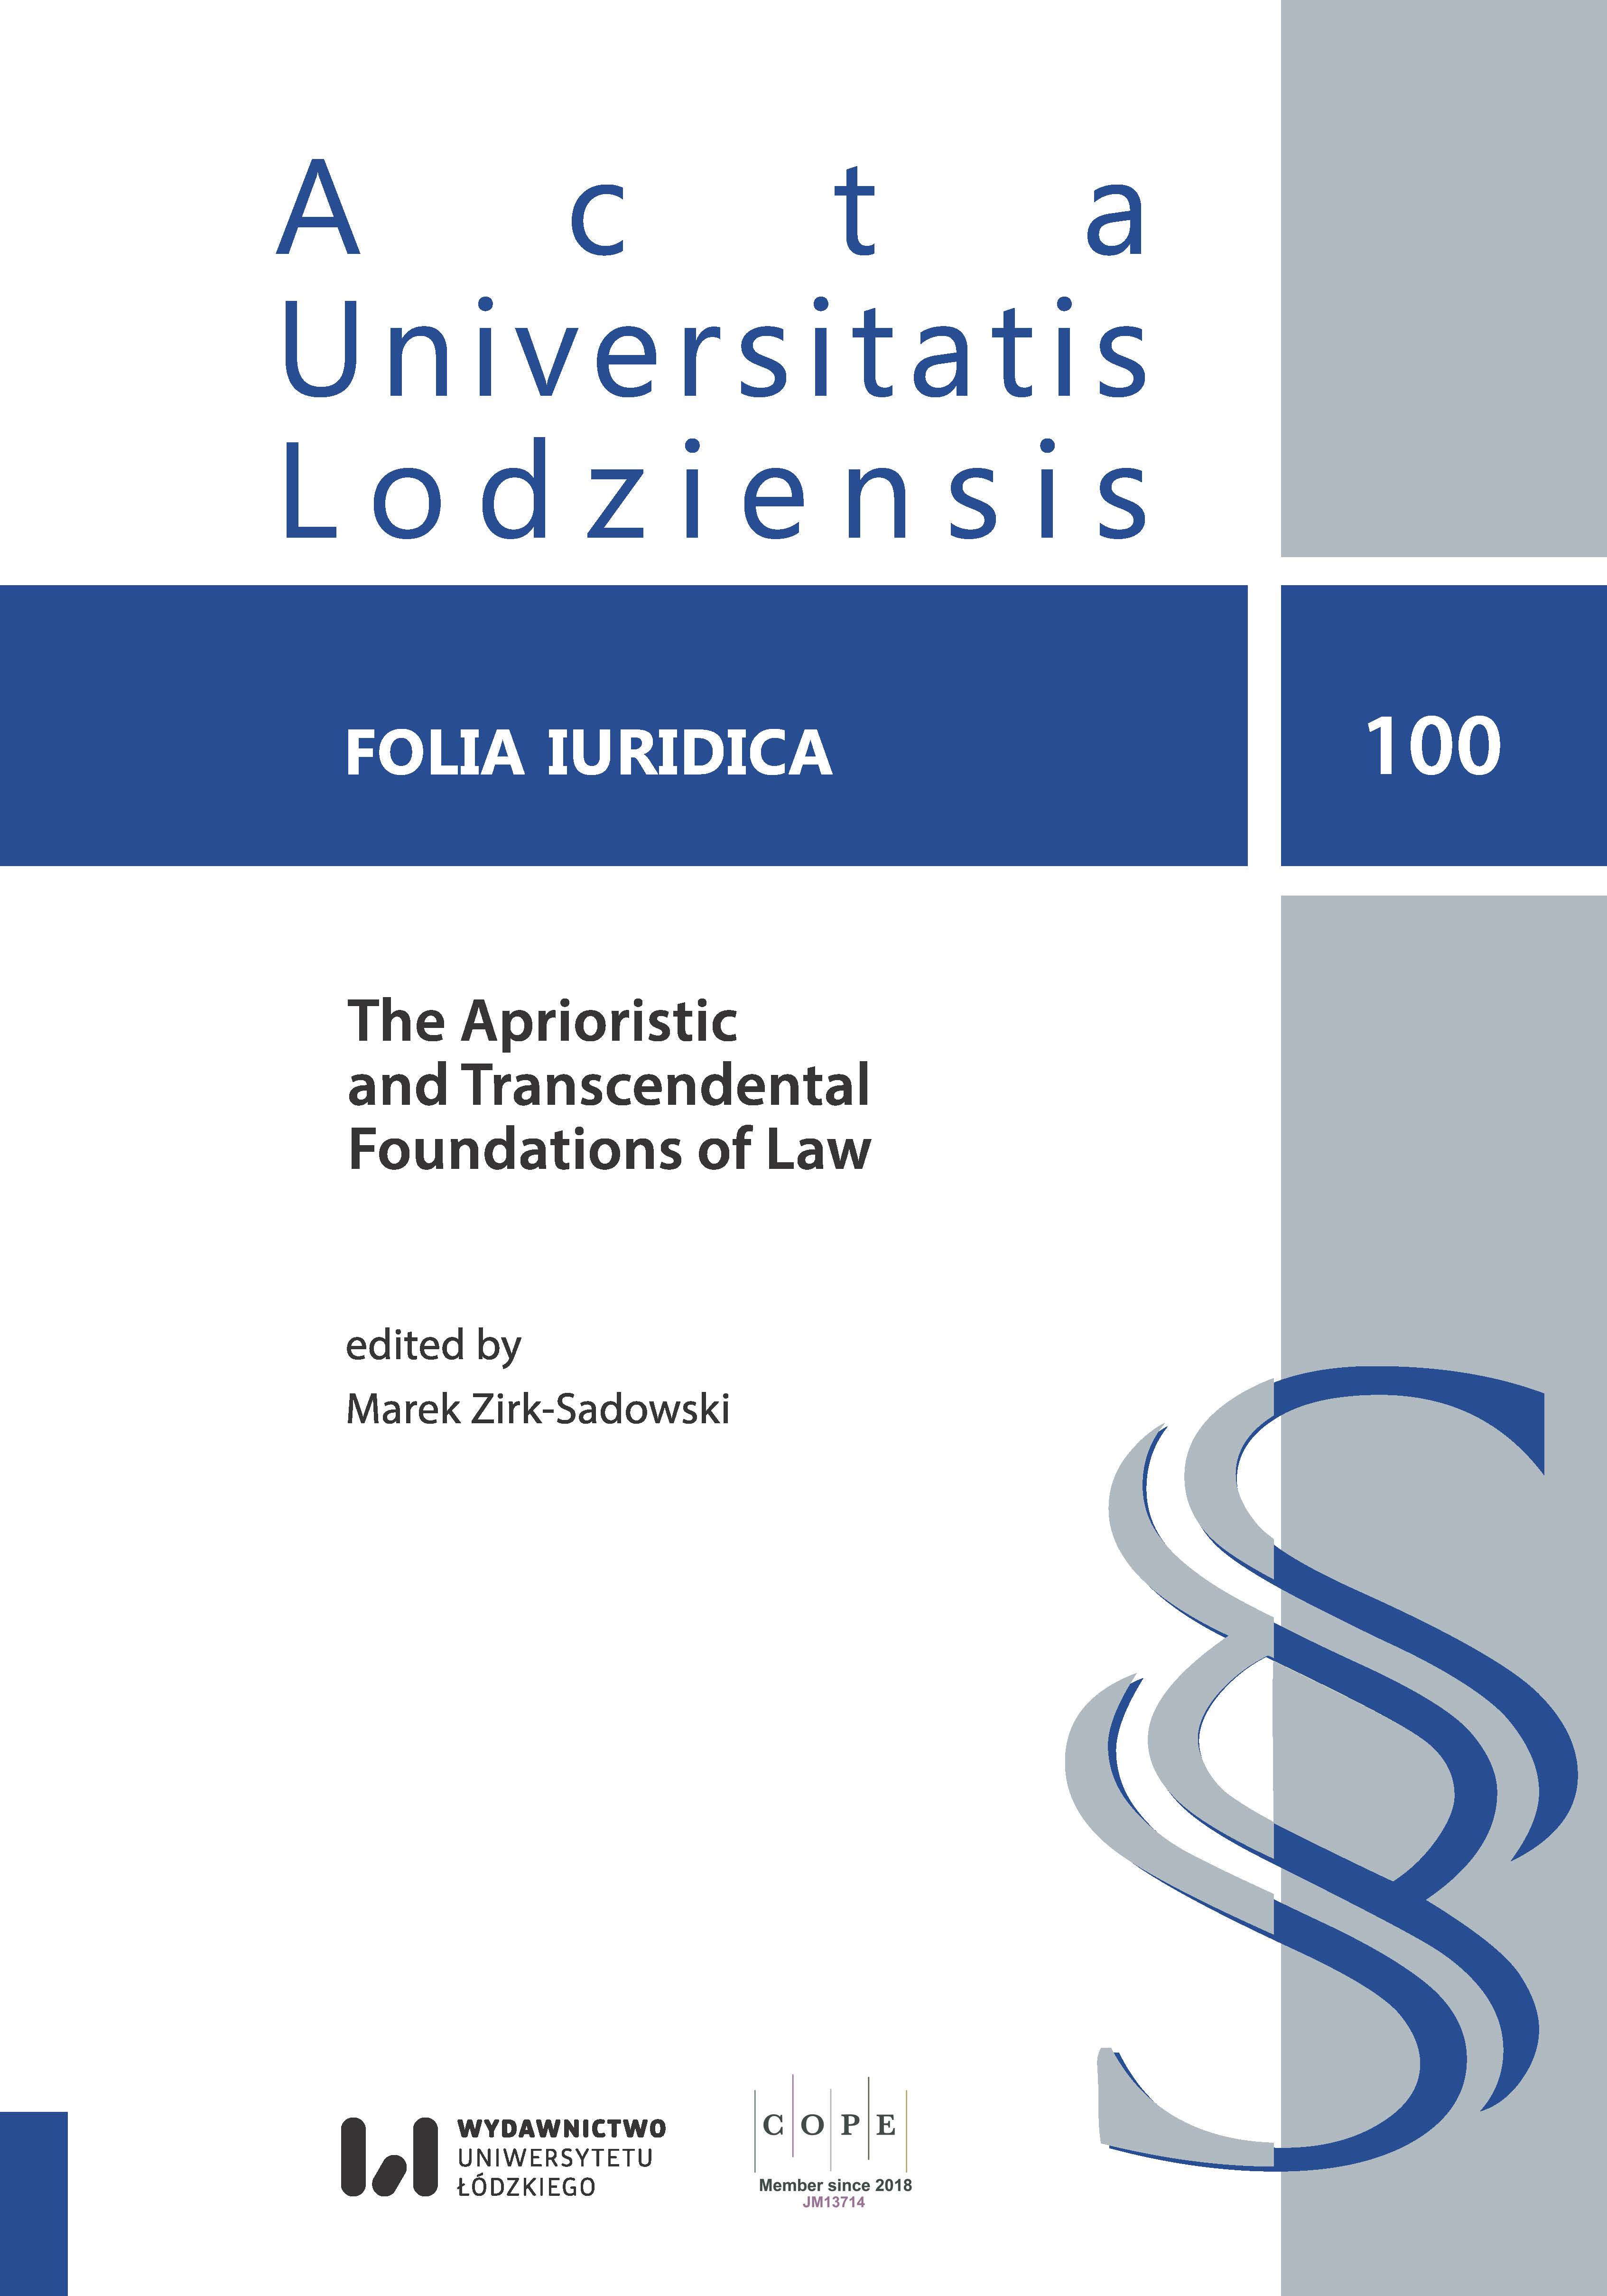 					View Vol. 100 (2022): The Aprioristic and Transcendental Foundations of Law 
				